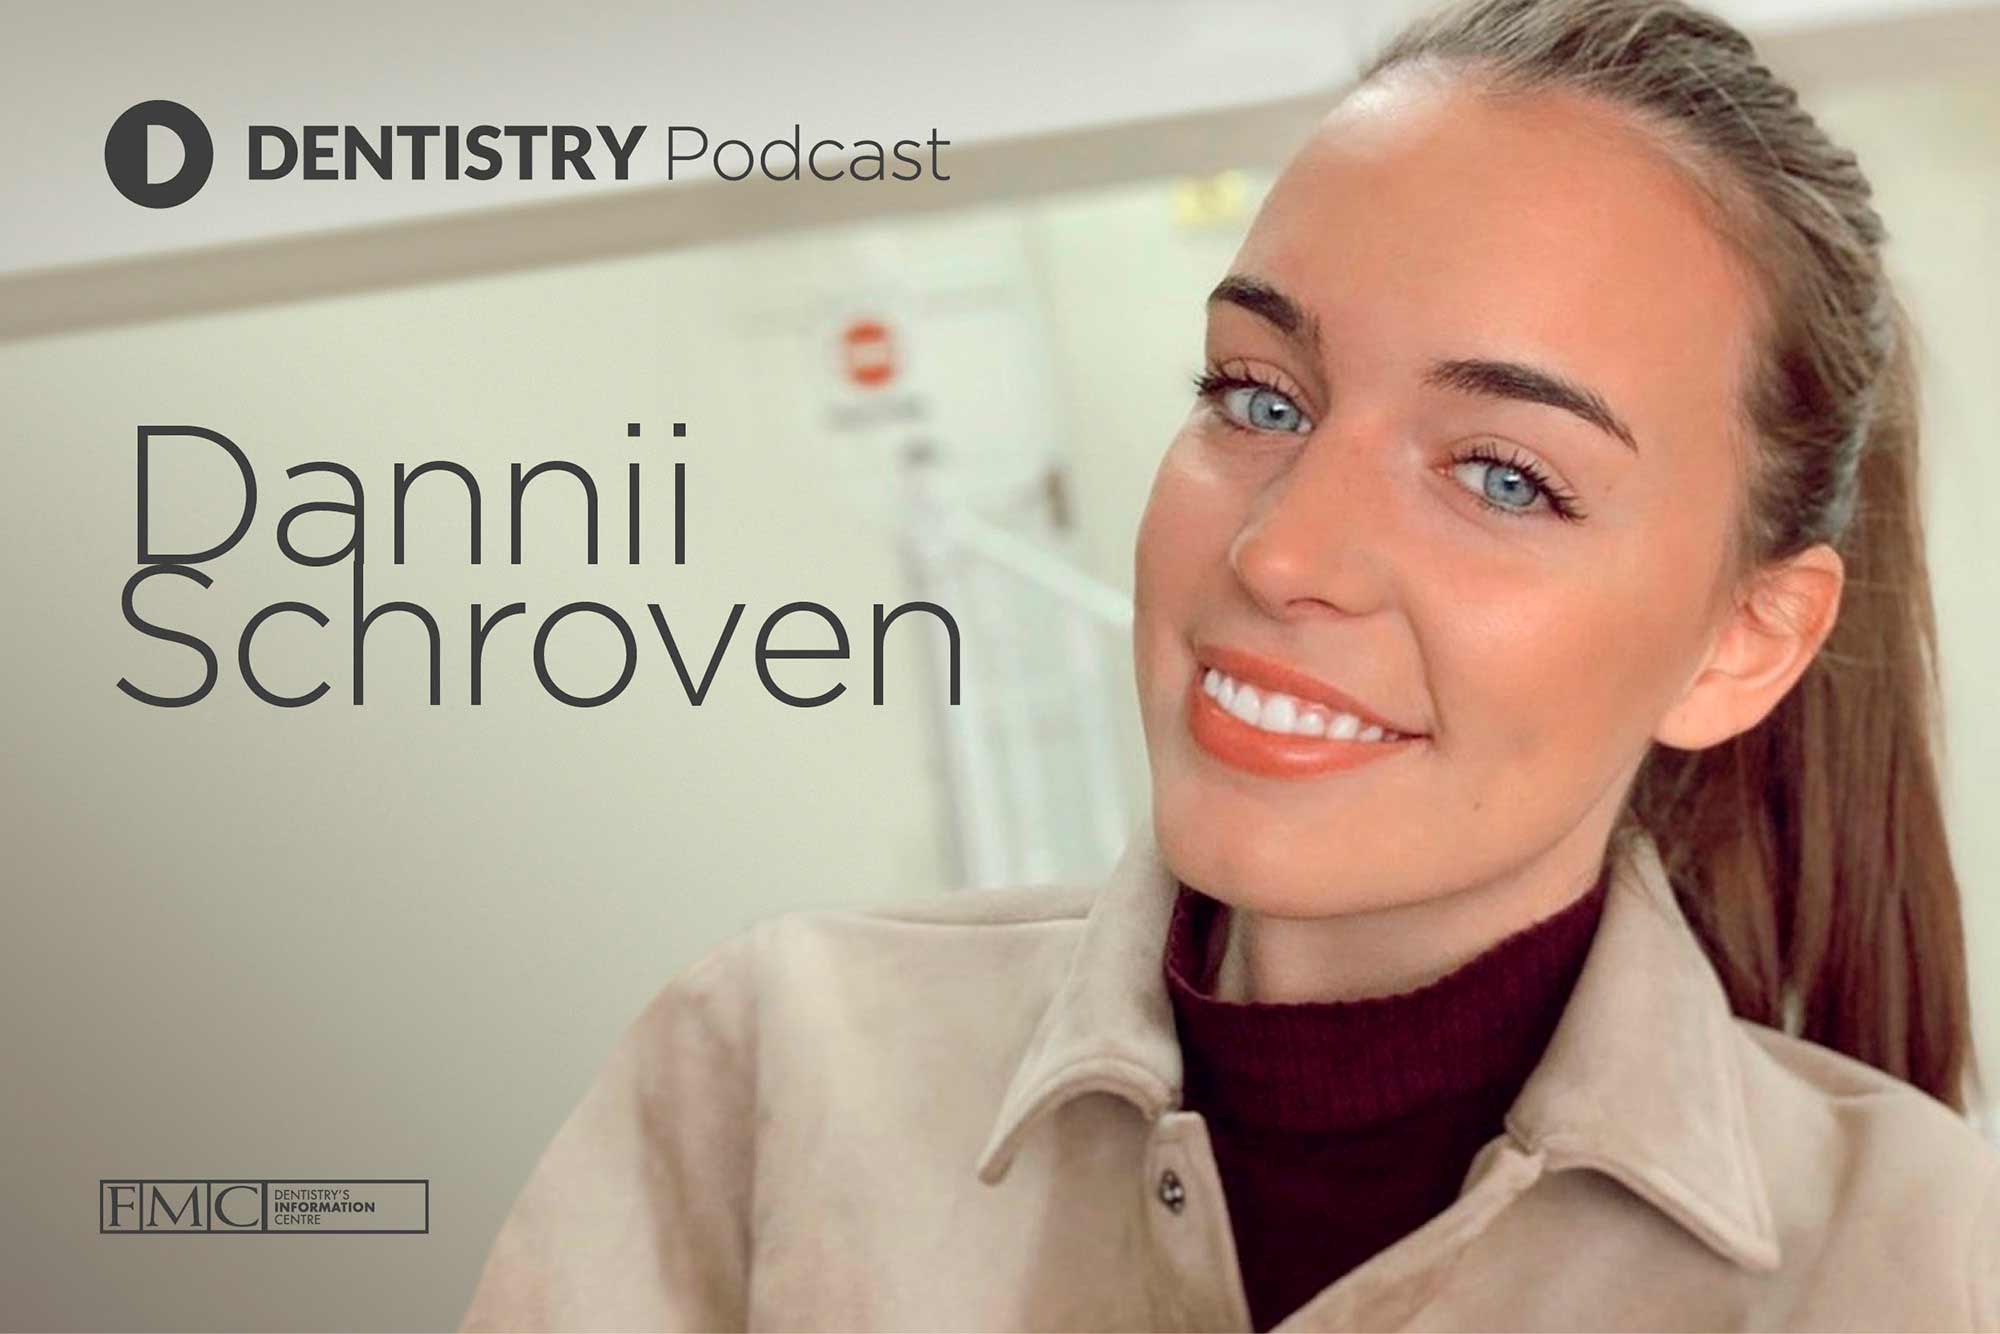 We hear from Dannii Schroven who discusses her journey into dental nursing and why she thinks more support is necessary